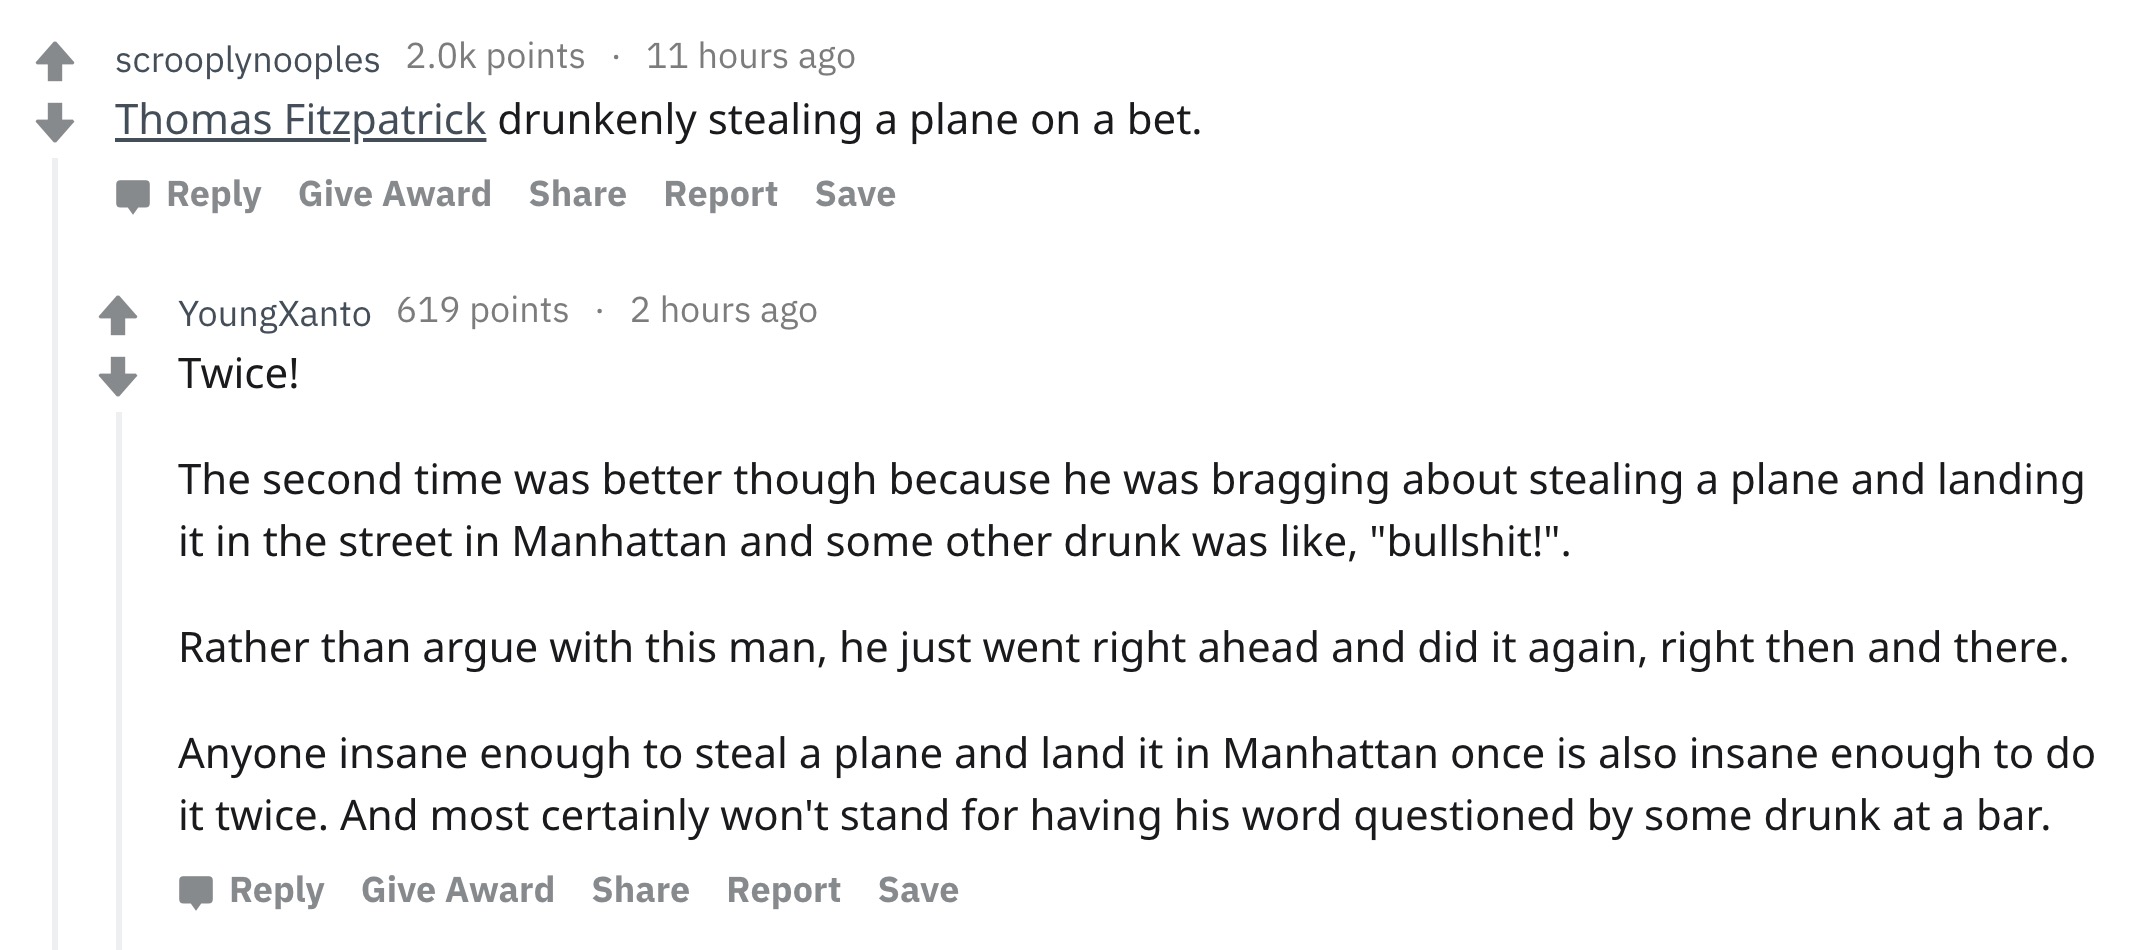 angle - 4 scrooplynooples 2.Ok points 11 hours ago Thomas Fitzpatrick drunkenly stealing a plane on a bet. Give Award Report Save YoungXanto 619 points 2 hours ago Twice! The second time was better though because he was bragging about stealing a plane and